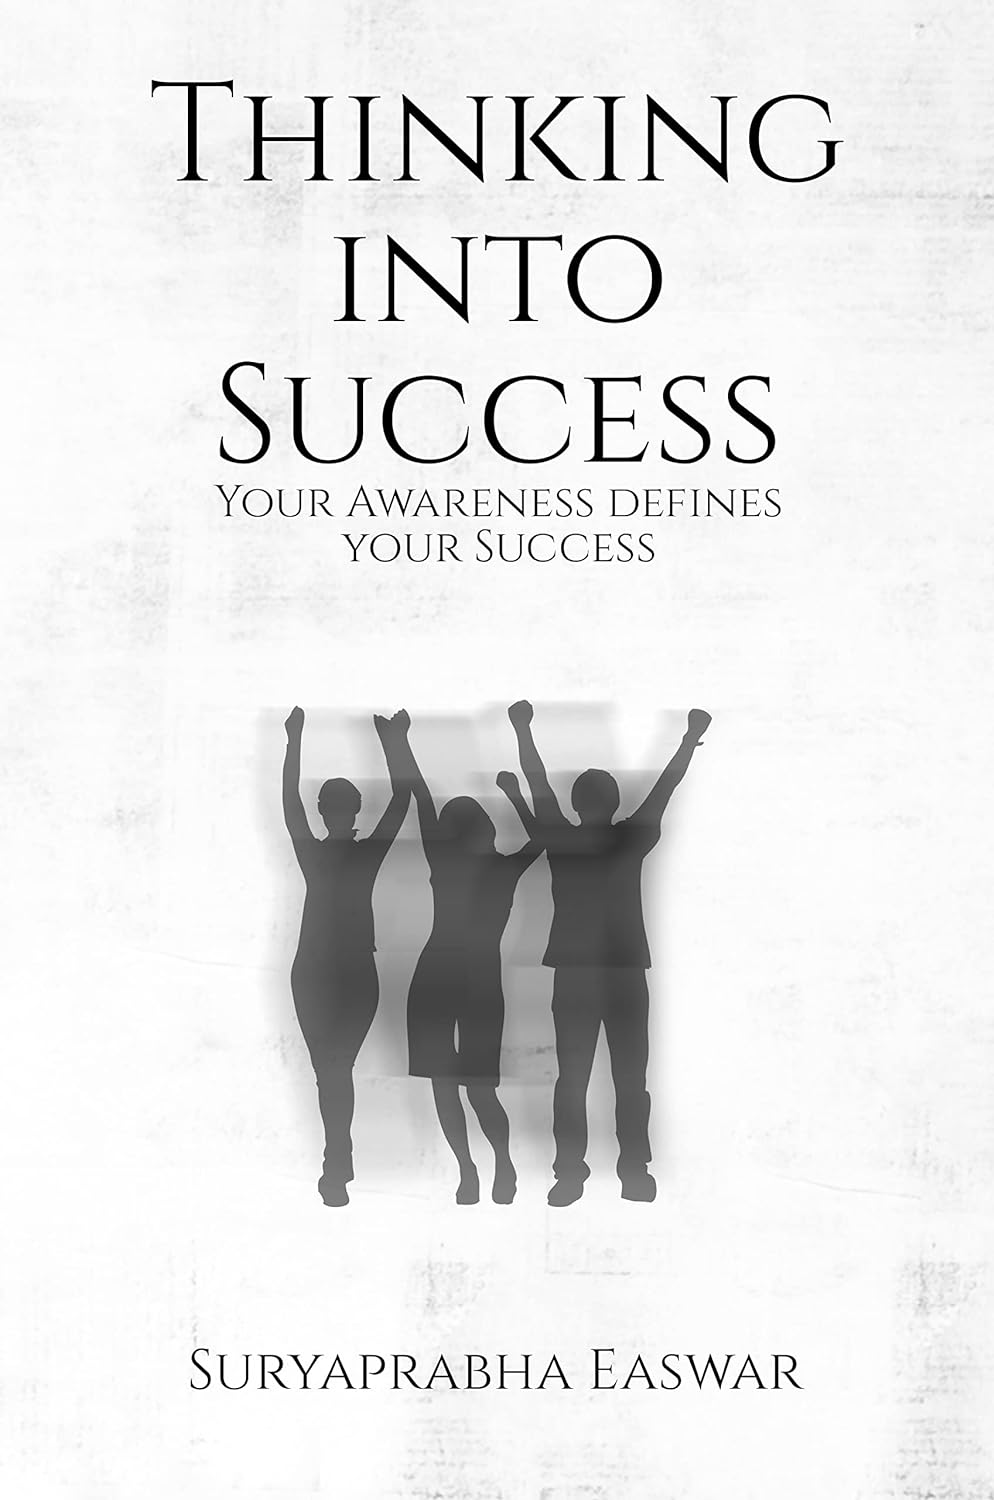 Transformative Insights Unveiled in Suryaprabha Easwar's Latest Book "Thinking into Success"